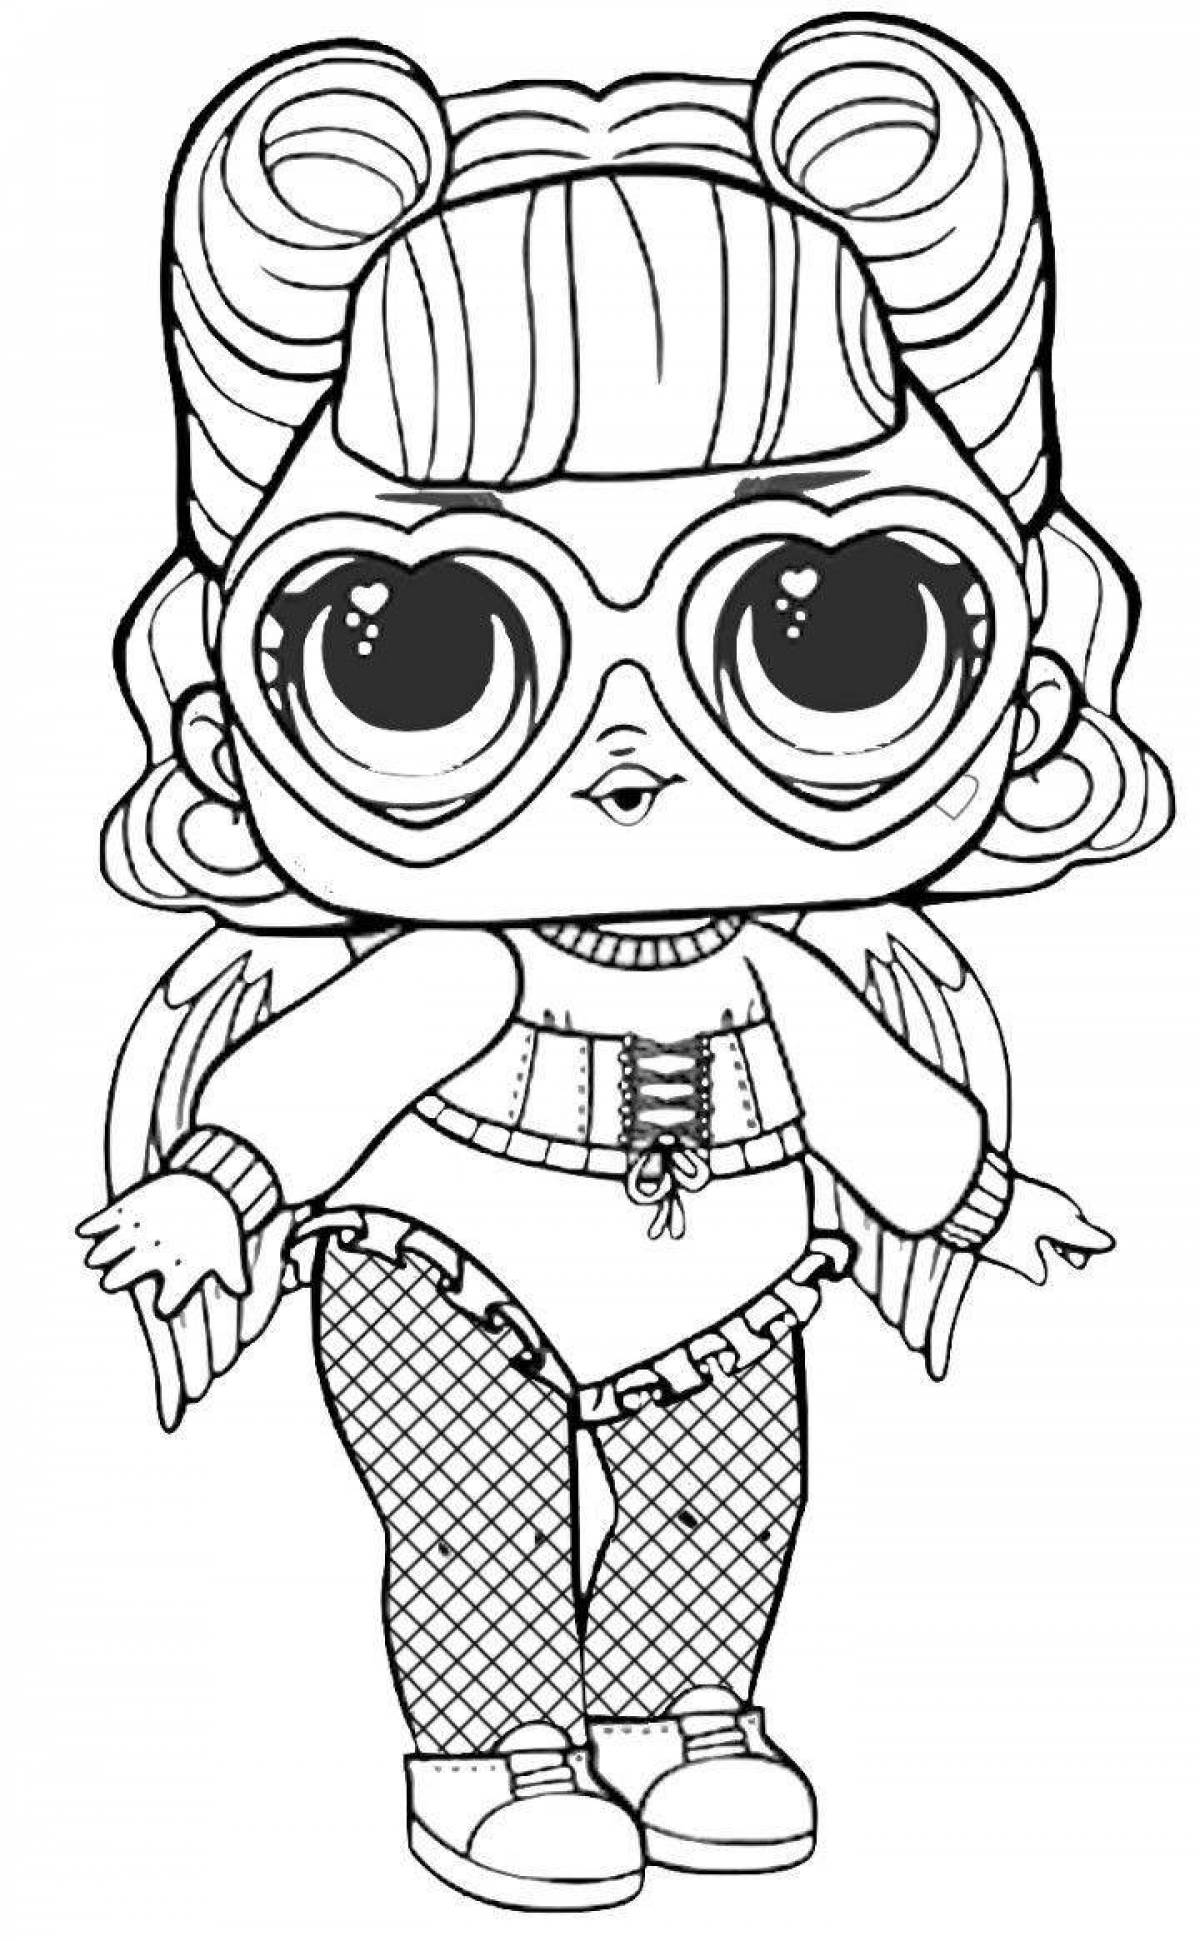 Fascinating coloring book for lol dolls